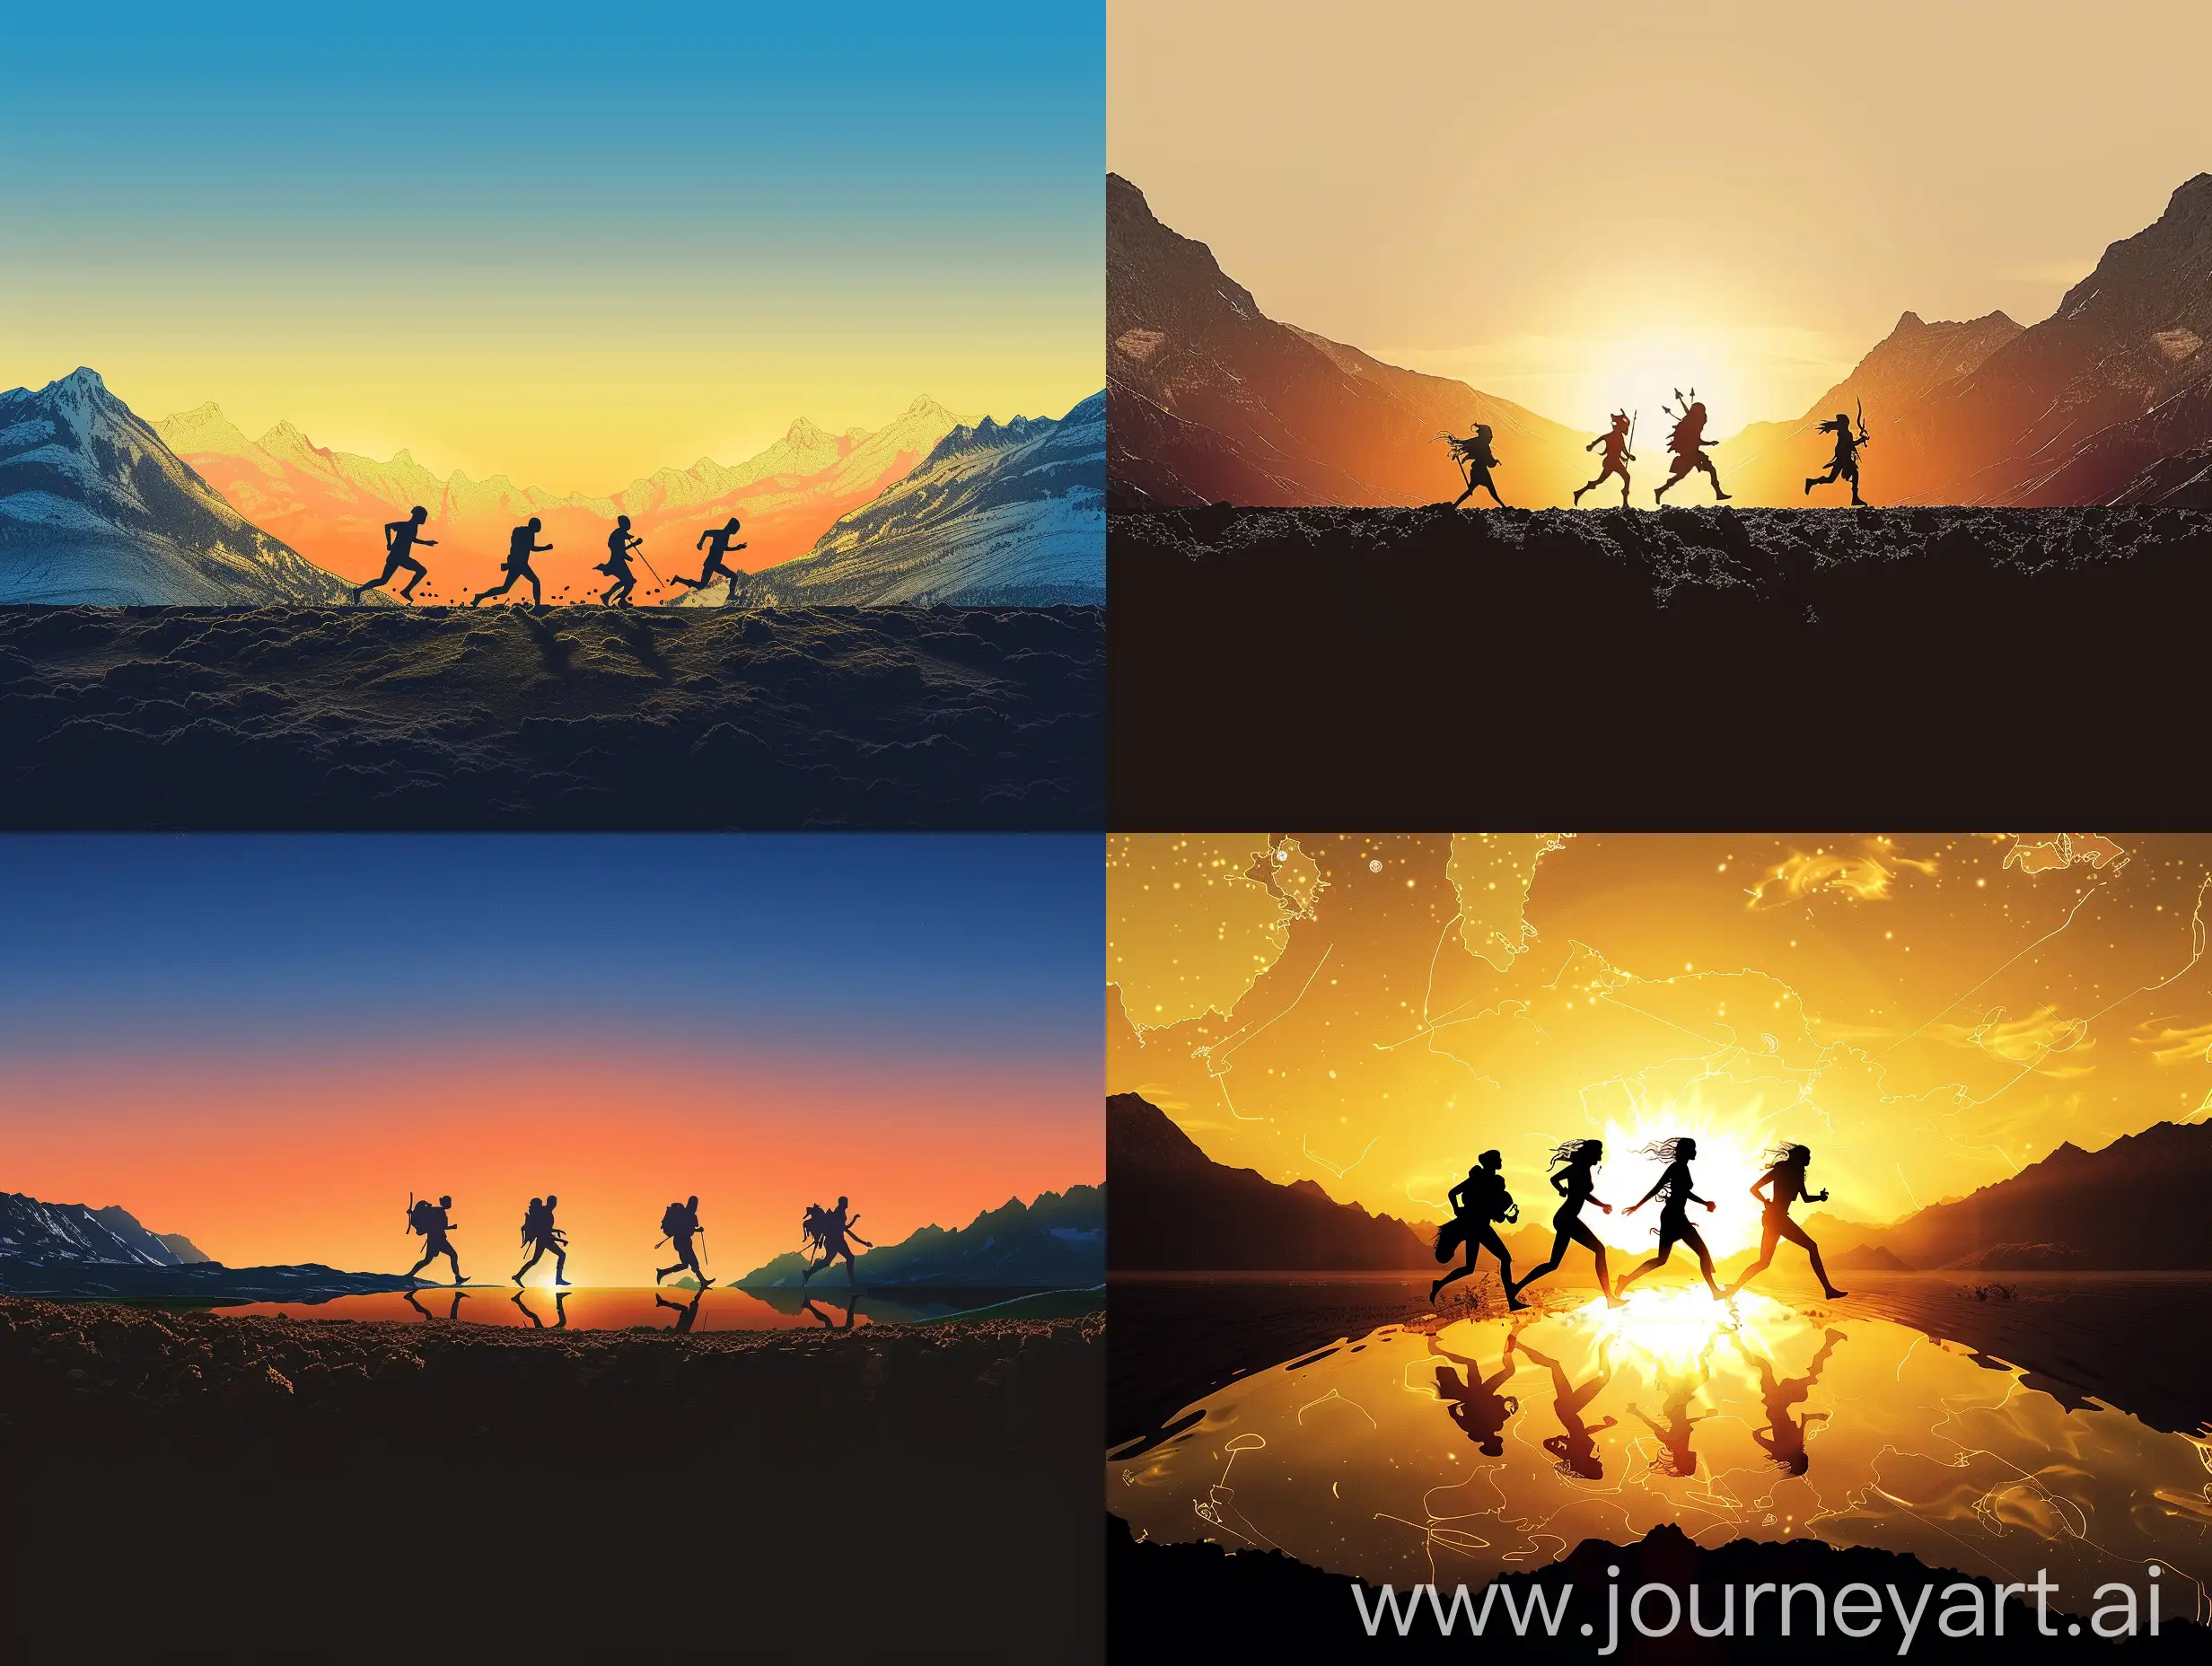 clear sunset, mountains left and right, silhouettes of fantasy travelers in the center running to right, front view, beneath image black earth, side view